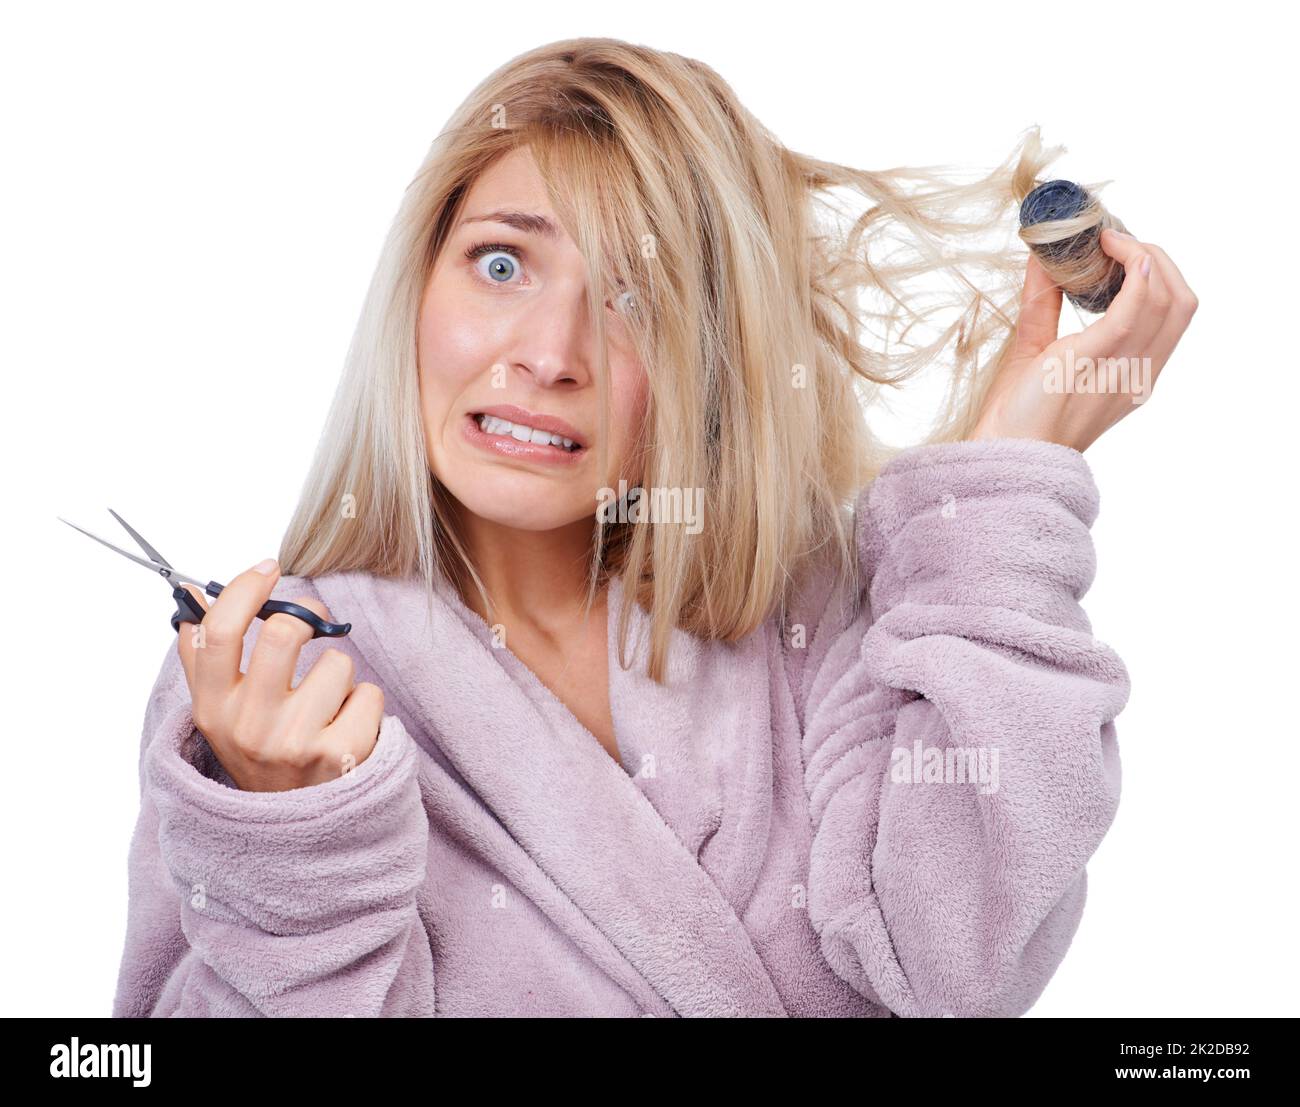 Its going to be a bad hair day. Studio portrait of a young woman having a bad hair day. Stock Photo